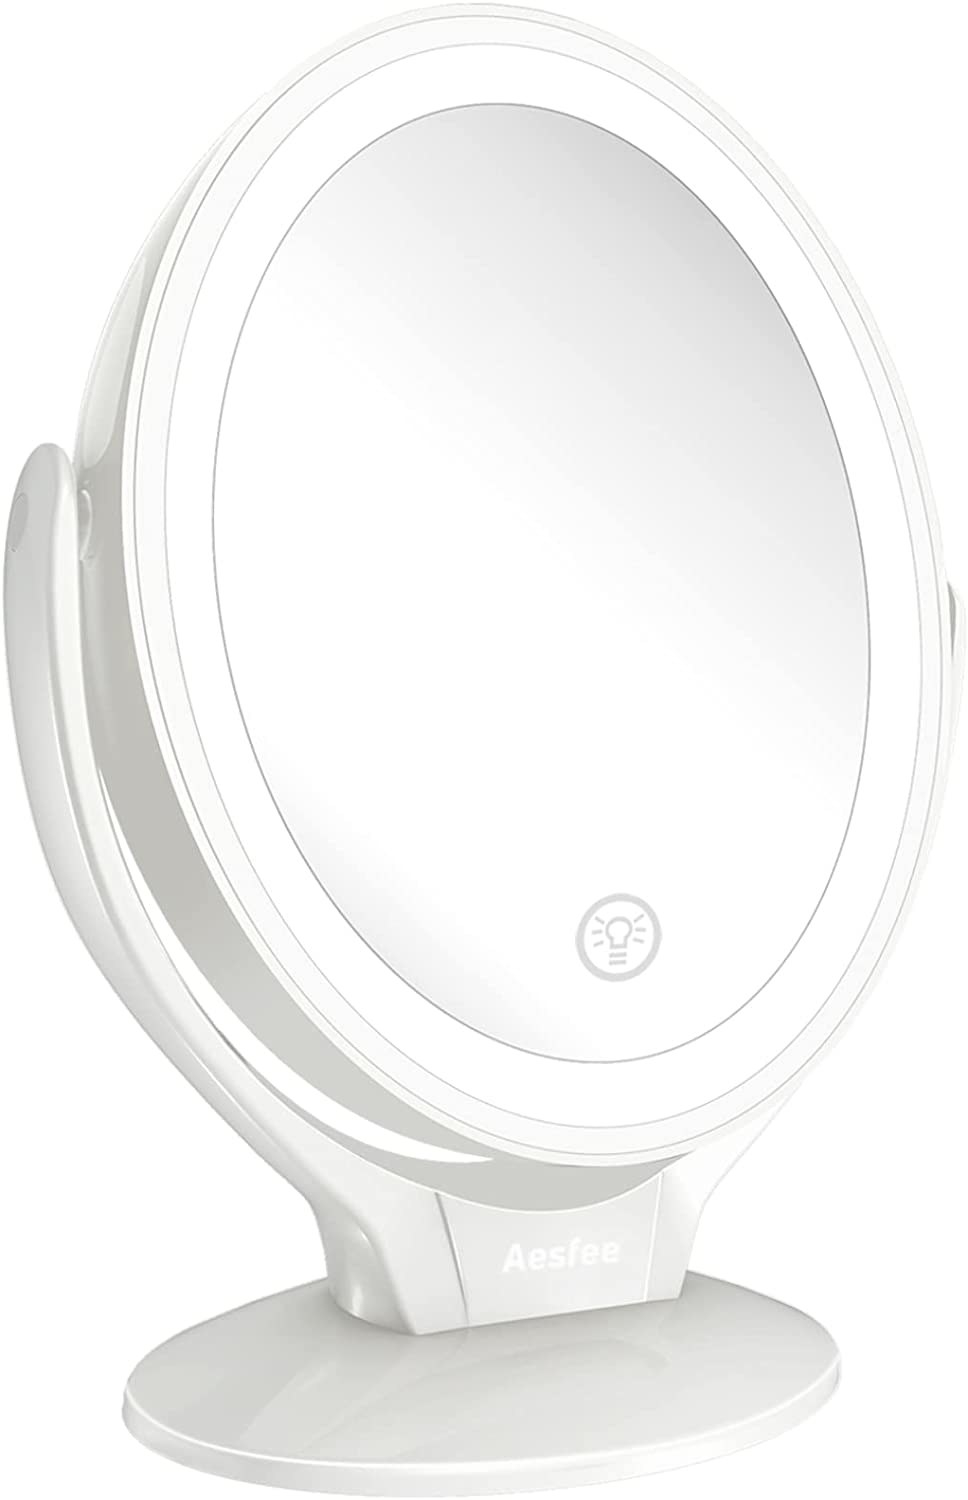 a round mirror on a blank background